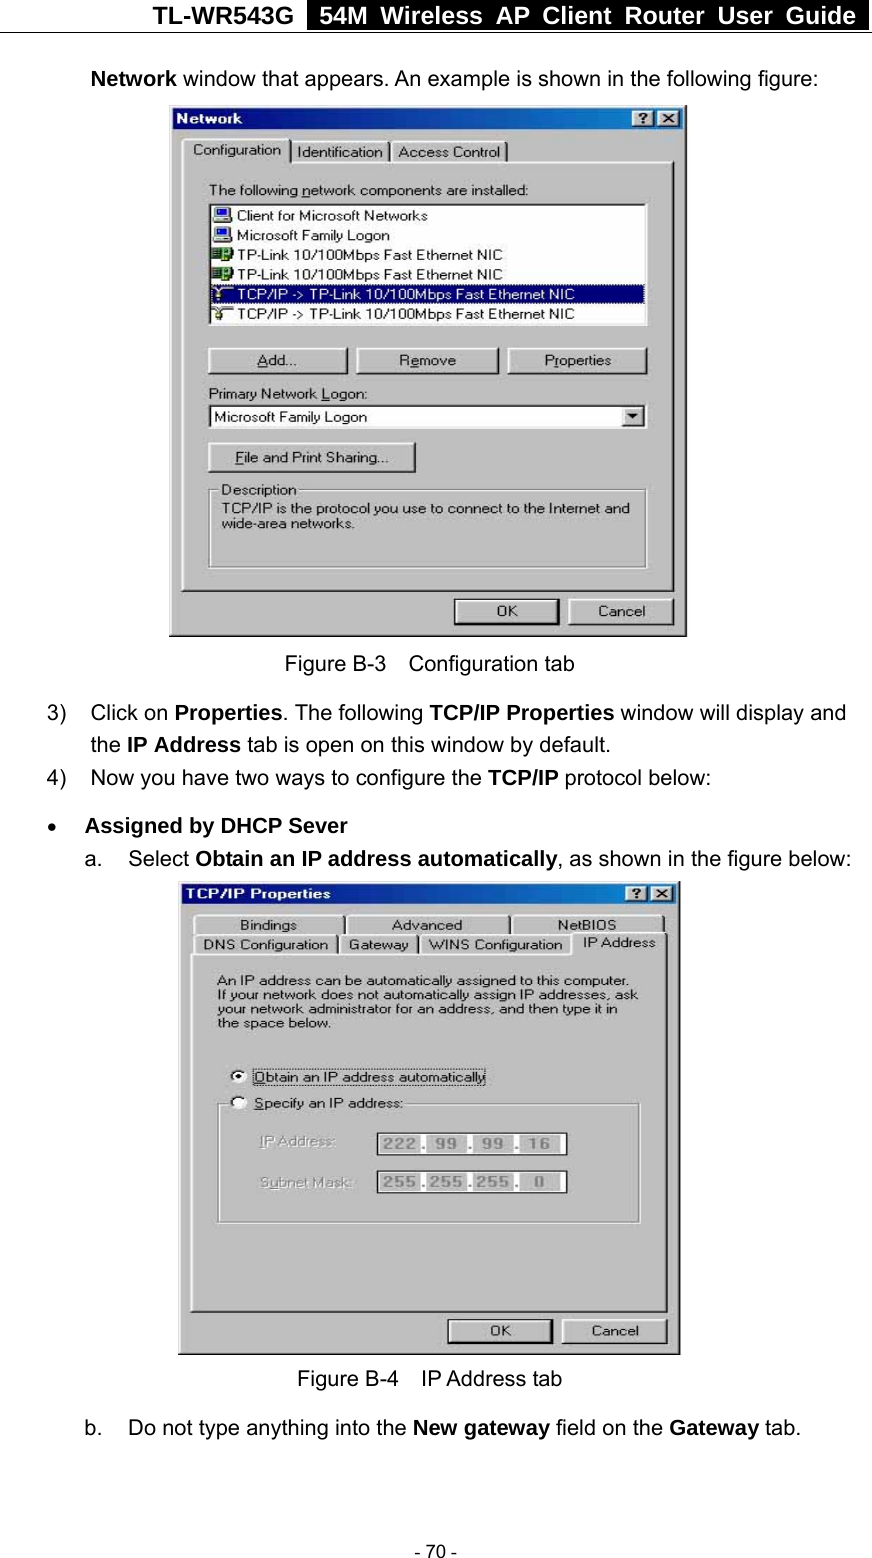 TL-WR543G   54M Wireless AP Client Router User Guide  Network window that appears. An example is shown in the following figure:  Figure B-3  Configuration tab 3) Click on Properties. The following TCP/IP Properties window will display and the IP Address tab is open on this window by default. 4)  Now you have two ways to configure the TCP/IP protocol below: • Assigned by DHCP Sever a. Select Obtain an IP address automatically, as shown in the figure below:  Figure B-4  IP Address tab b.  Do not type anything into the New gateway field on the Gateway tab.    - 70 - 